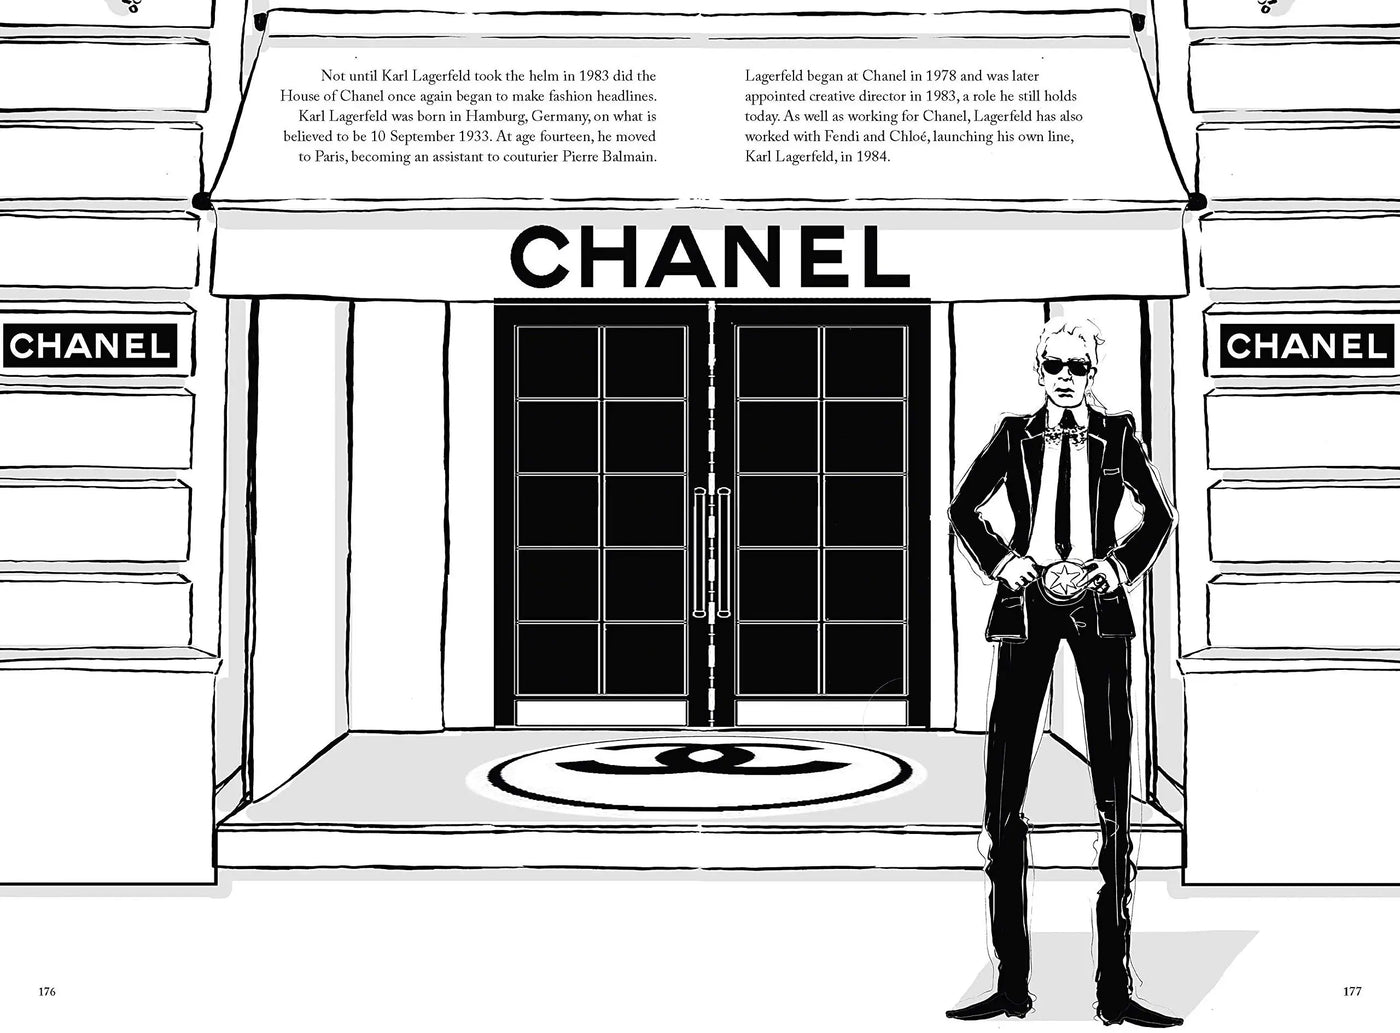 An Illustrated Biography of Coco Chanel